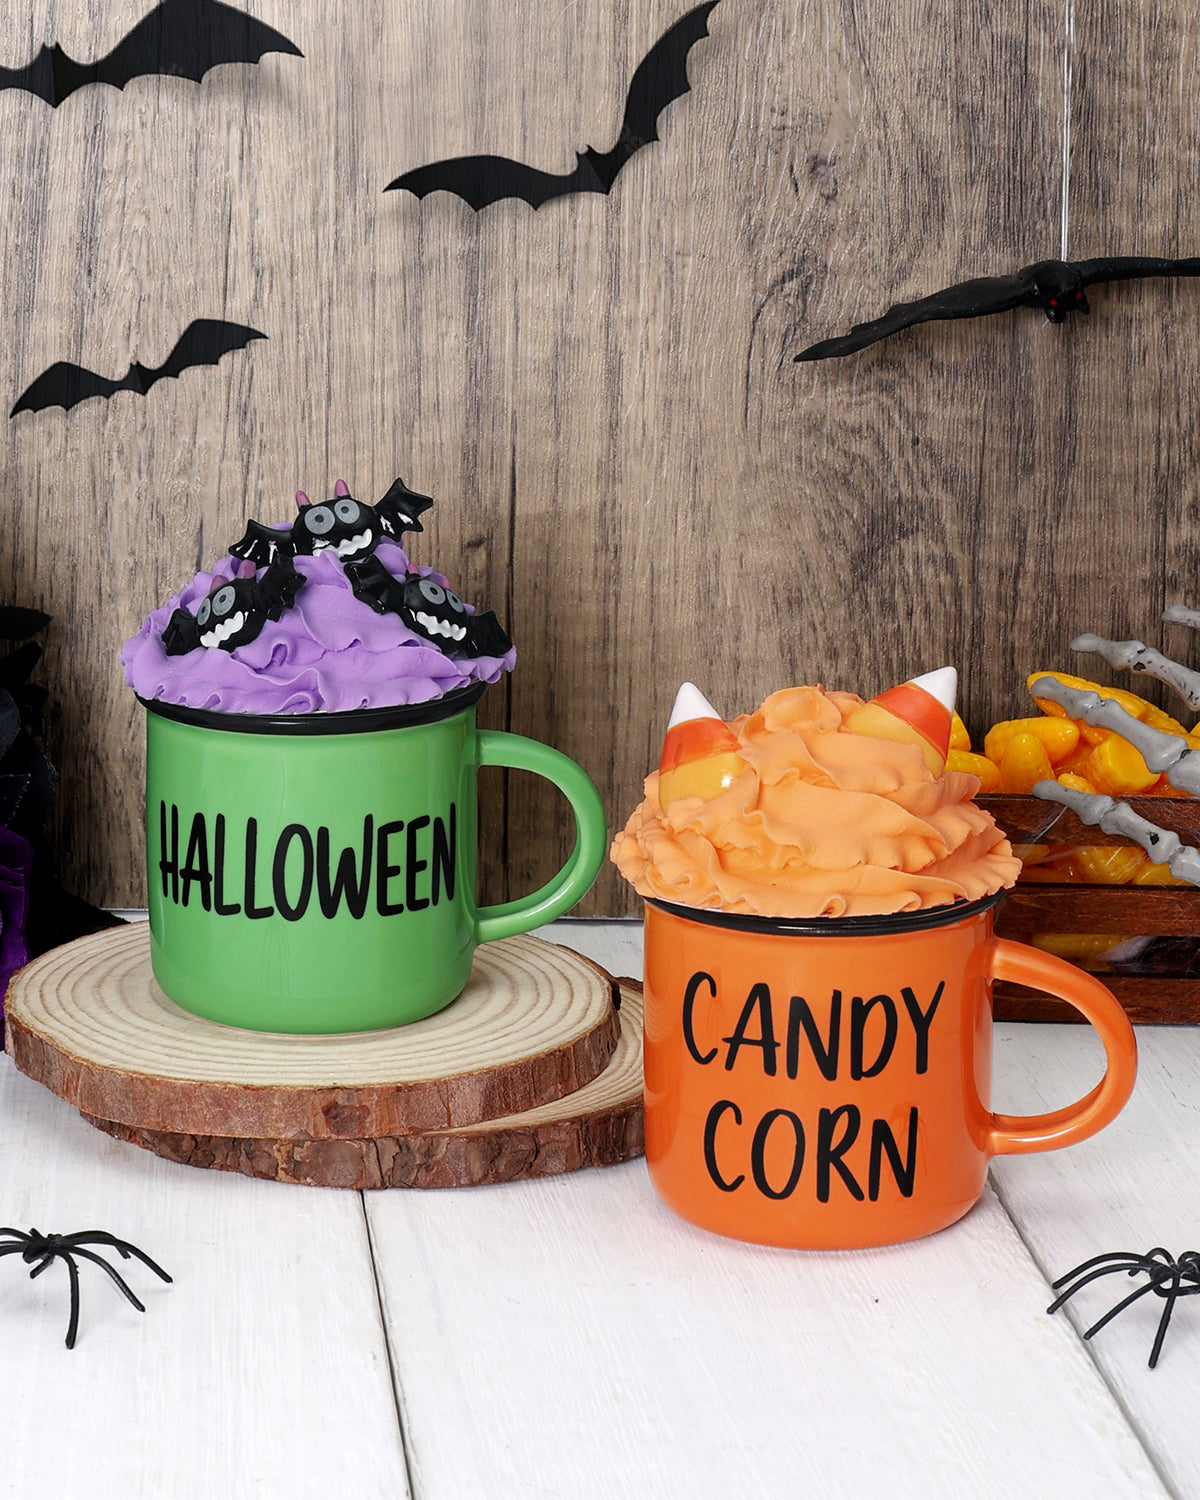 DIY HALLOWEEN FAUX WHIPPED CREAM MUG TOPPERS